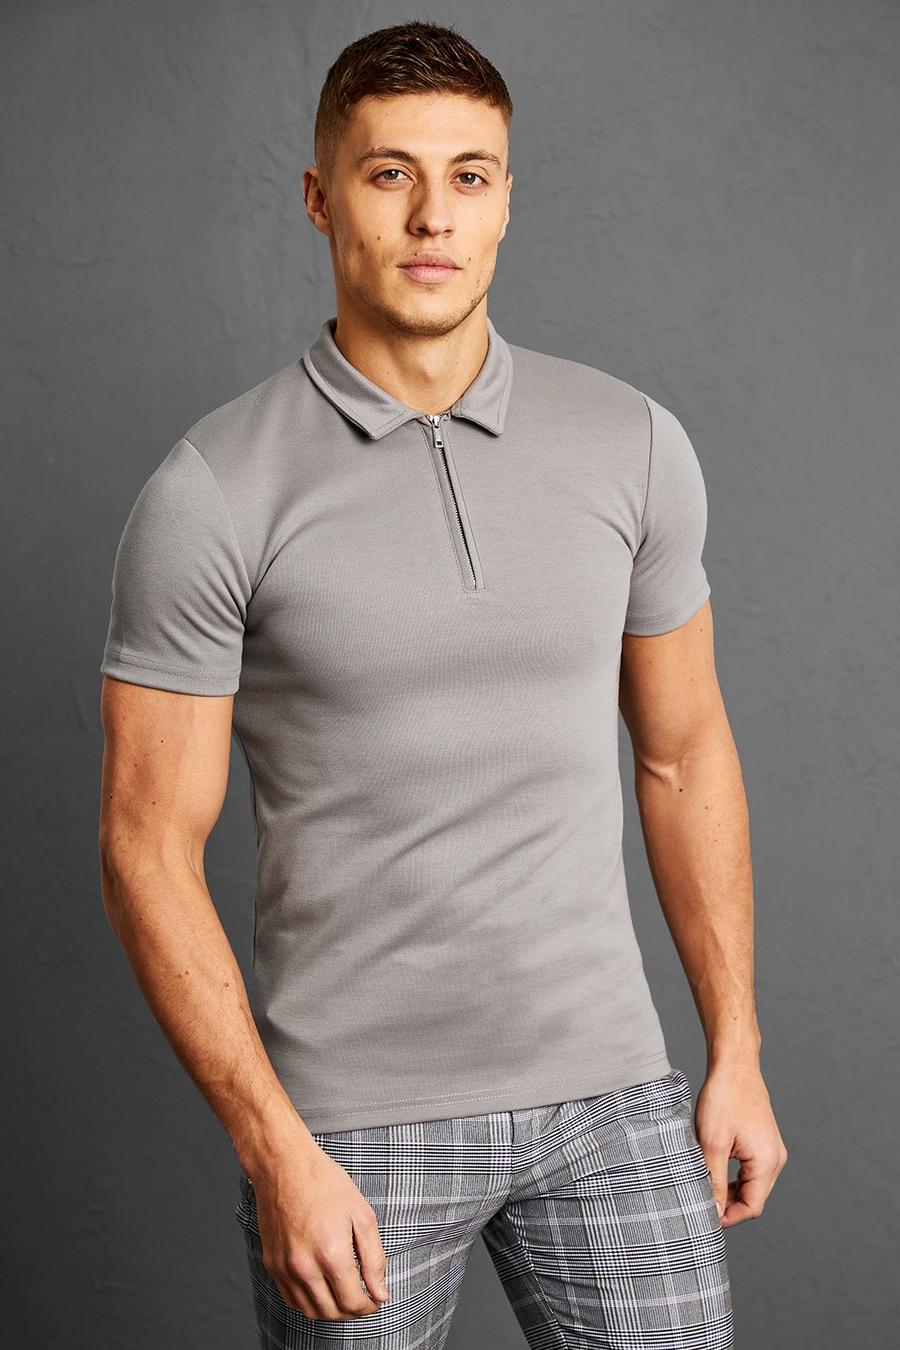 Charcoal grey Smart Muscle Fit Zip Neck Polo